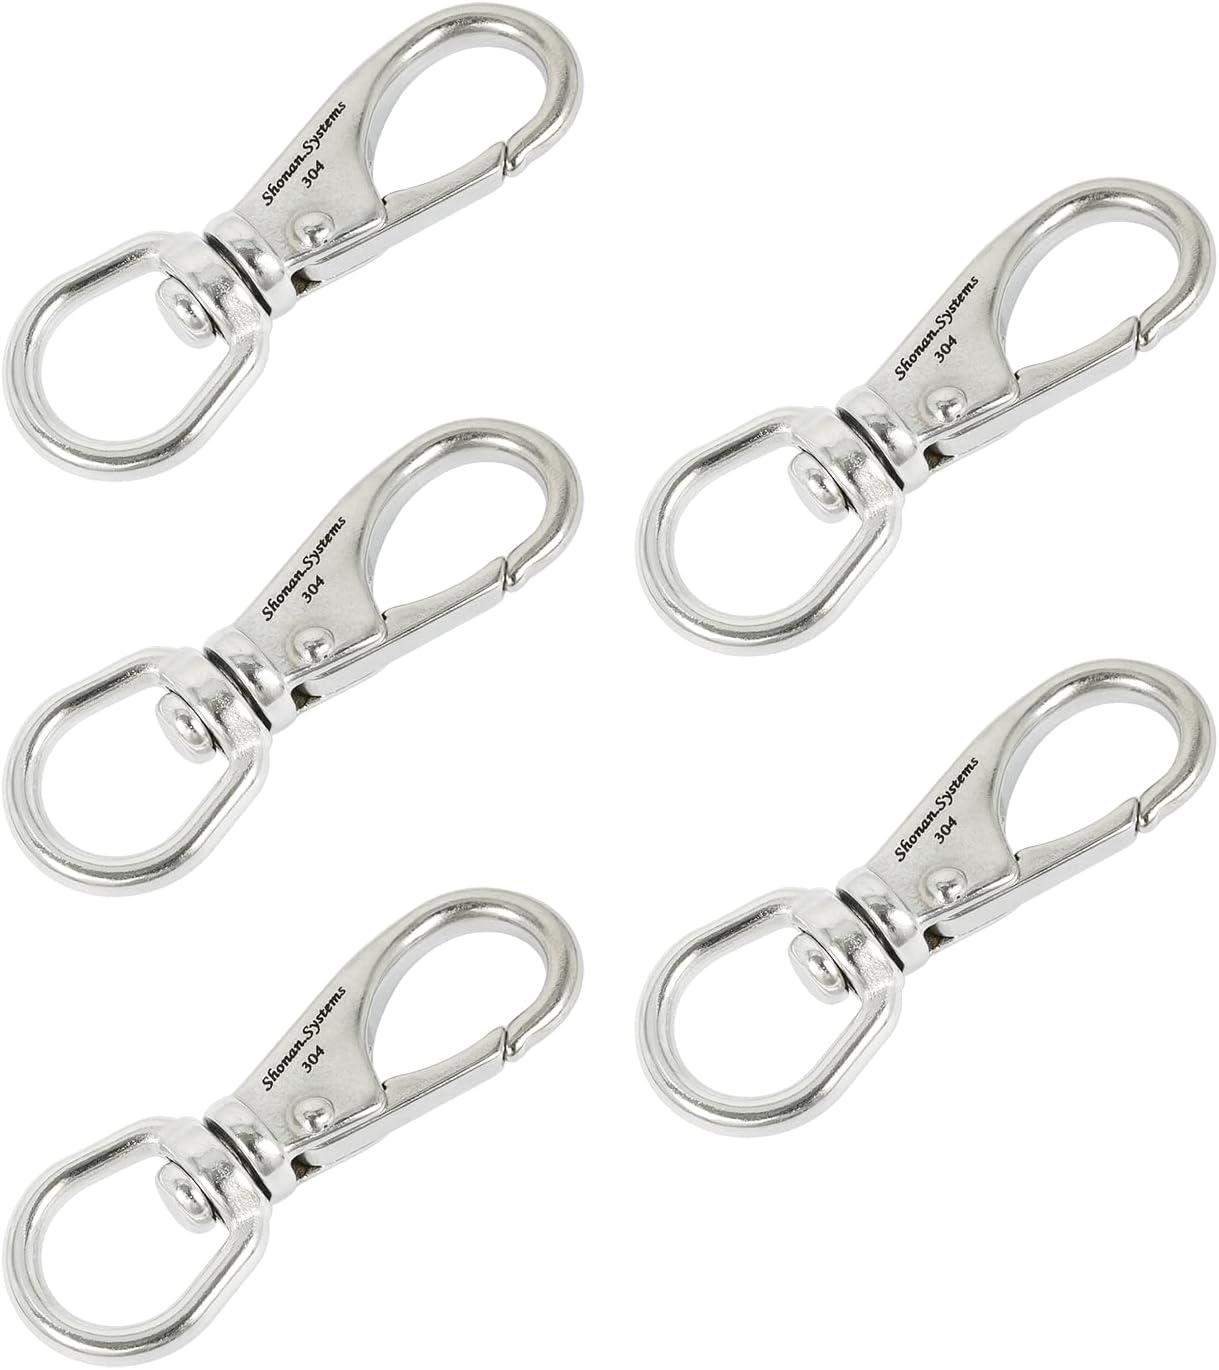 Qty:2 - Large 316 Stainless Steel Heavy Duty Hook Swivel Clasp Scuba  Diving, Dog